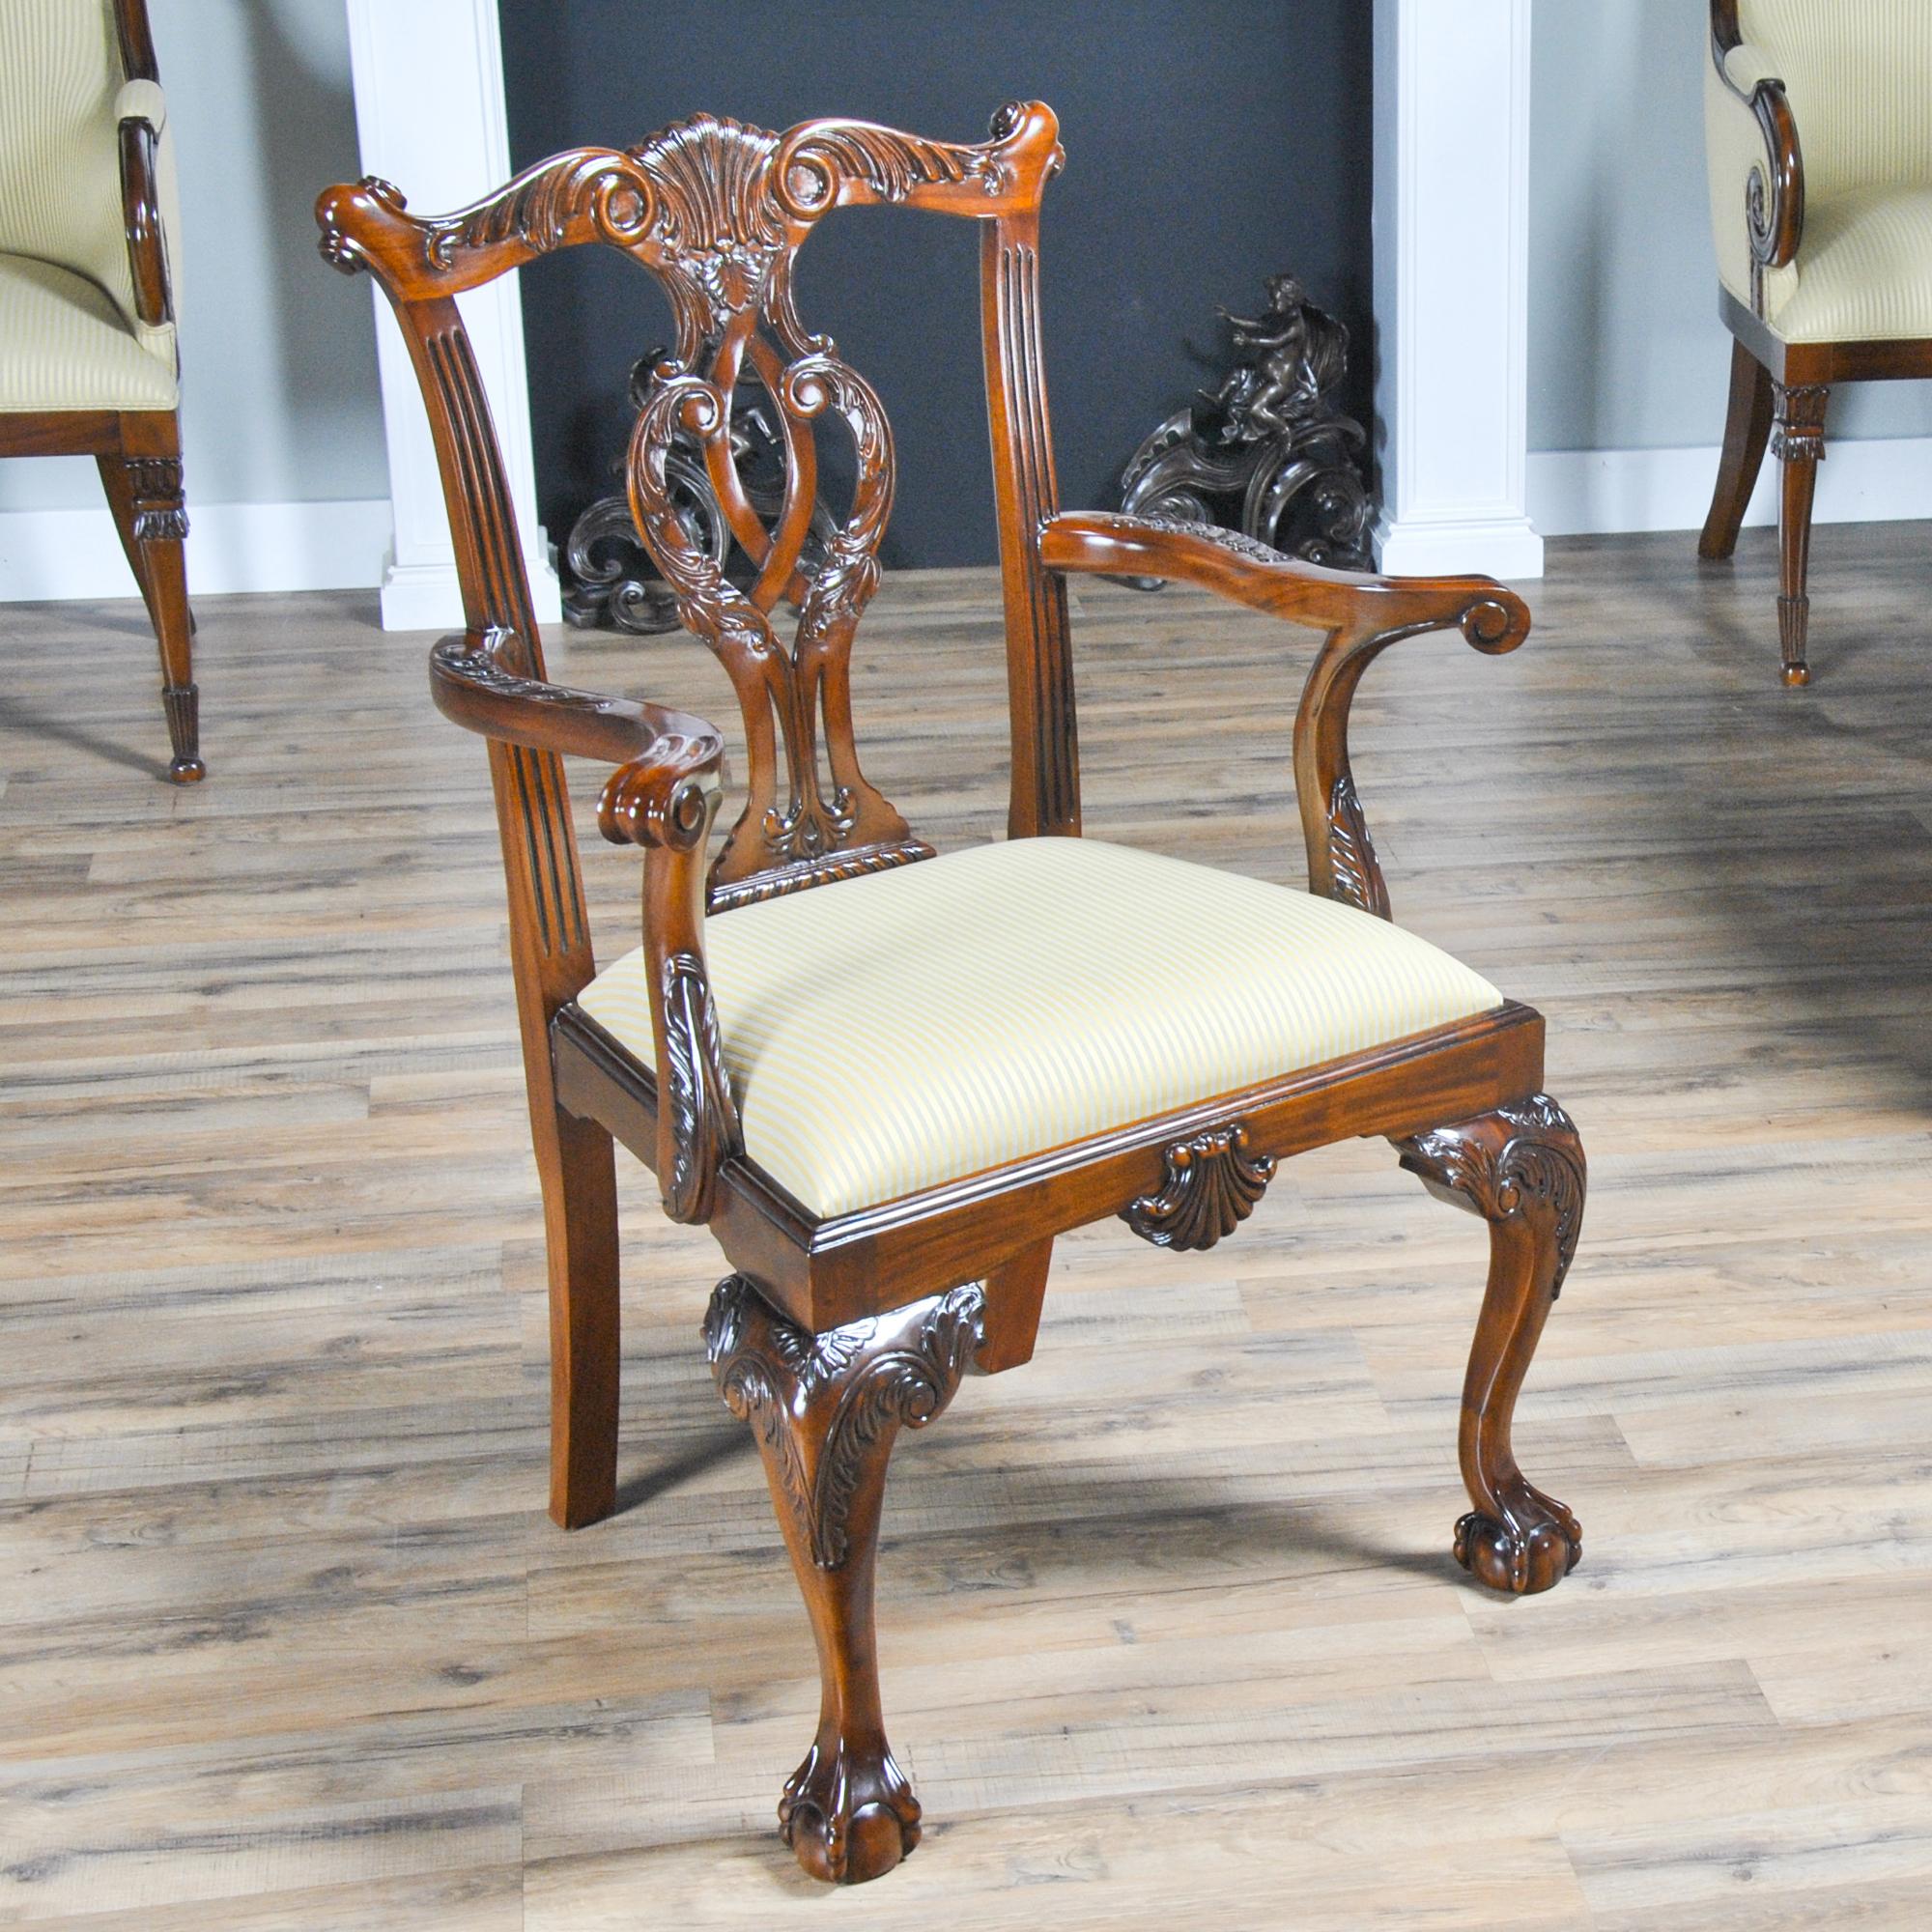 This set of 10 Philadelphia Chippendale Chairs consists of 2 arm chairs and 8 side chairs. The chairs were inspired by some of the finest carvers and cabinetmakers ever found in the United States. Similar to examples found in the Philadelphia Museum